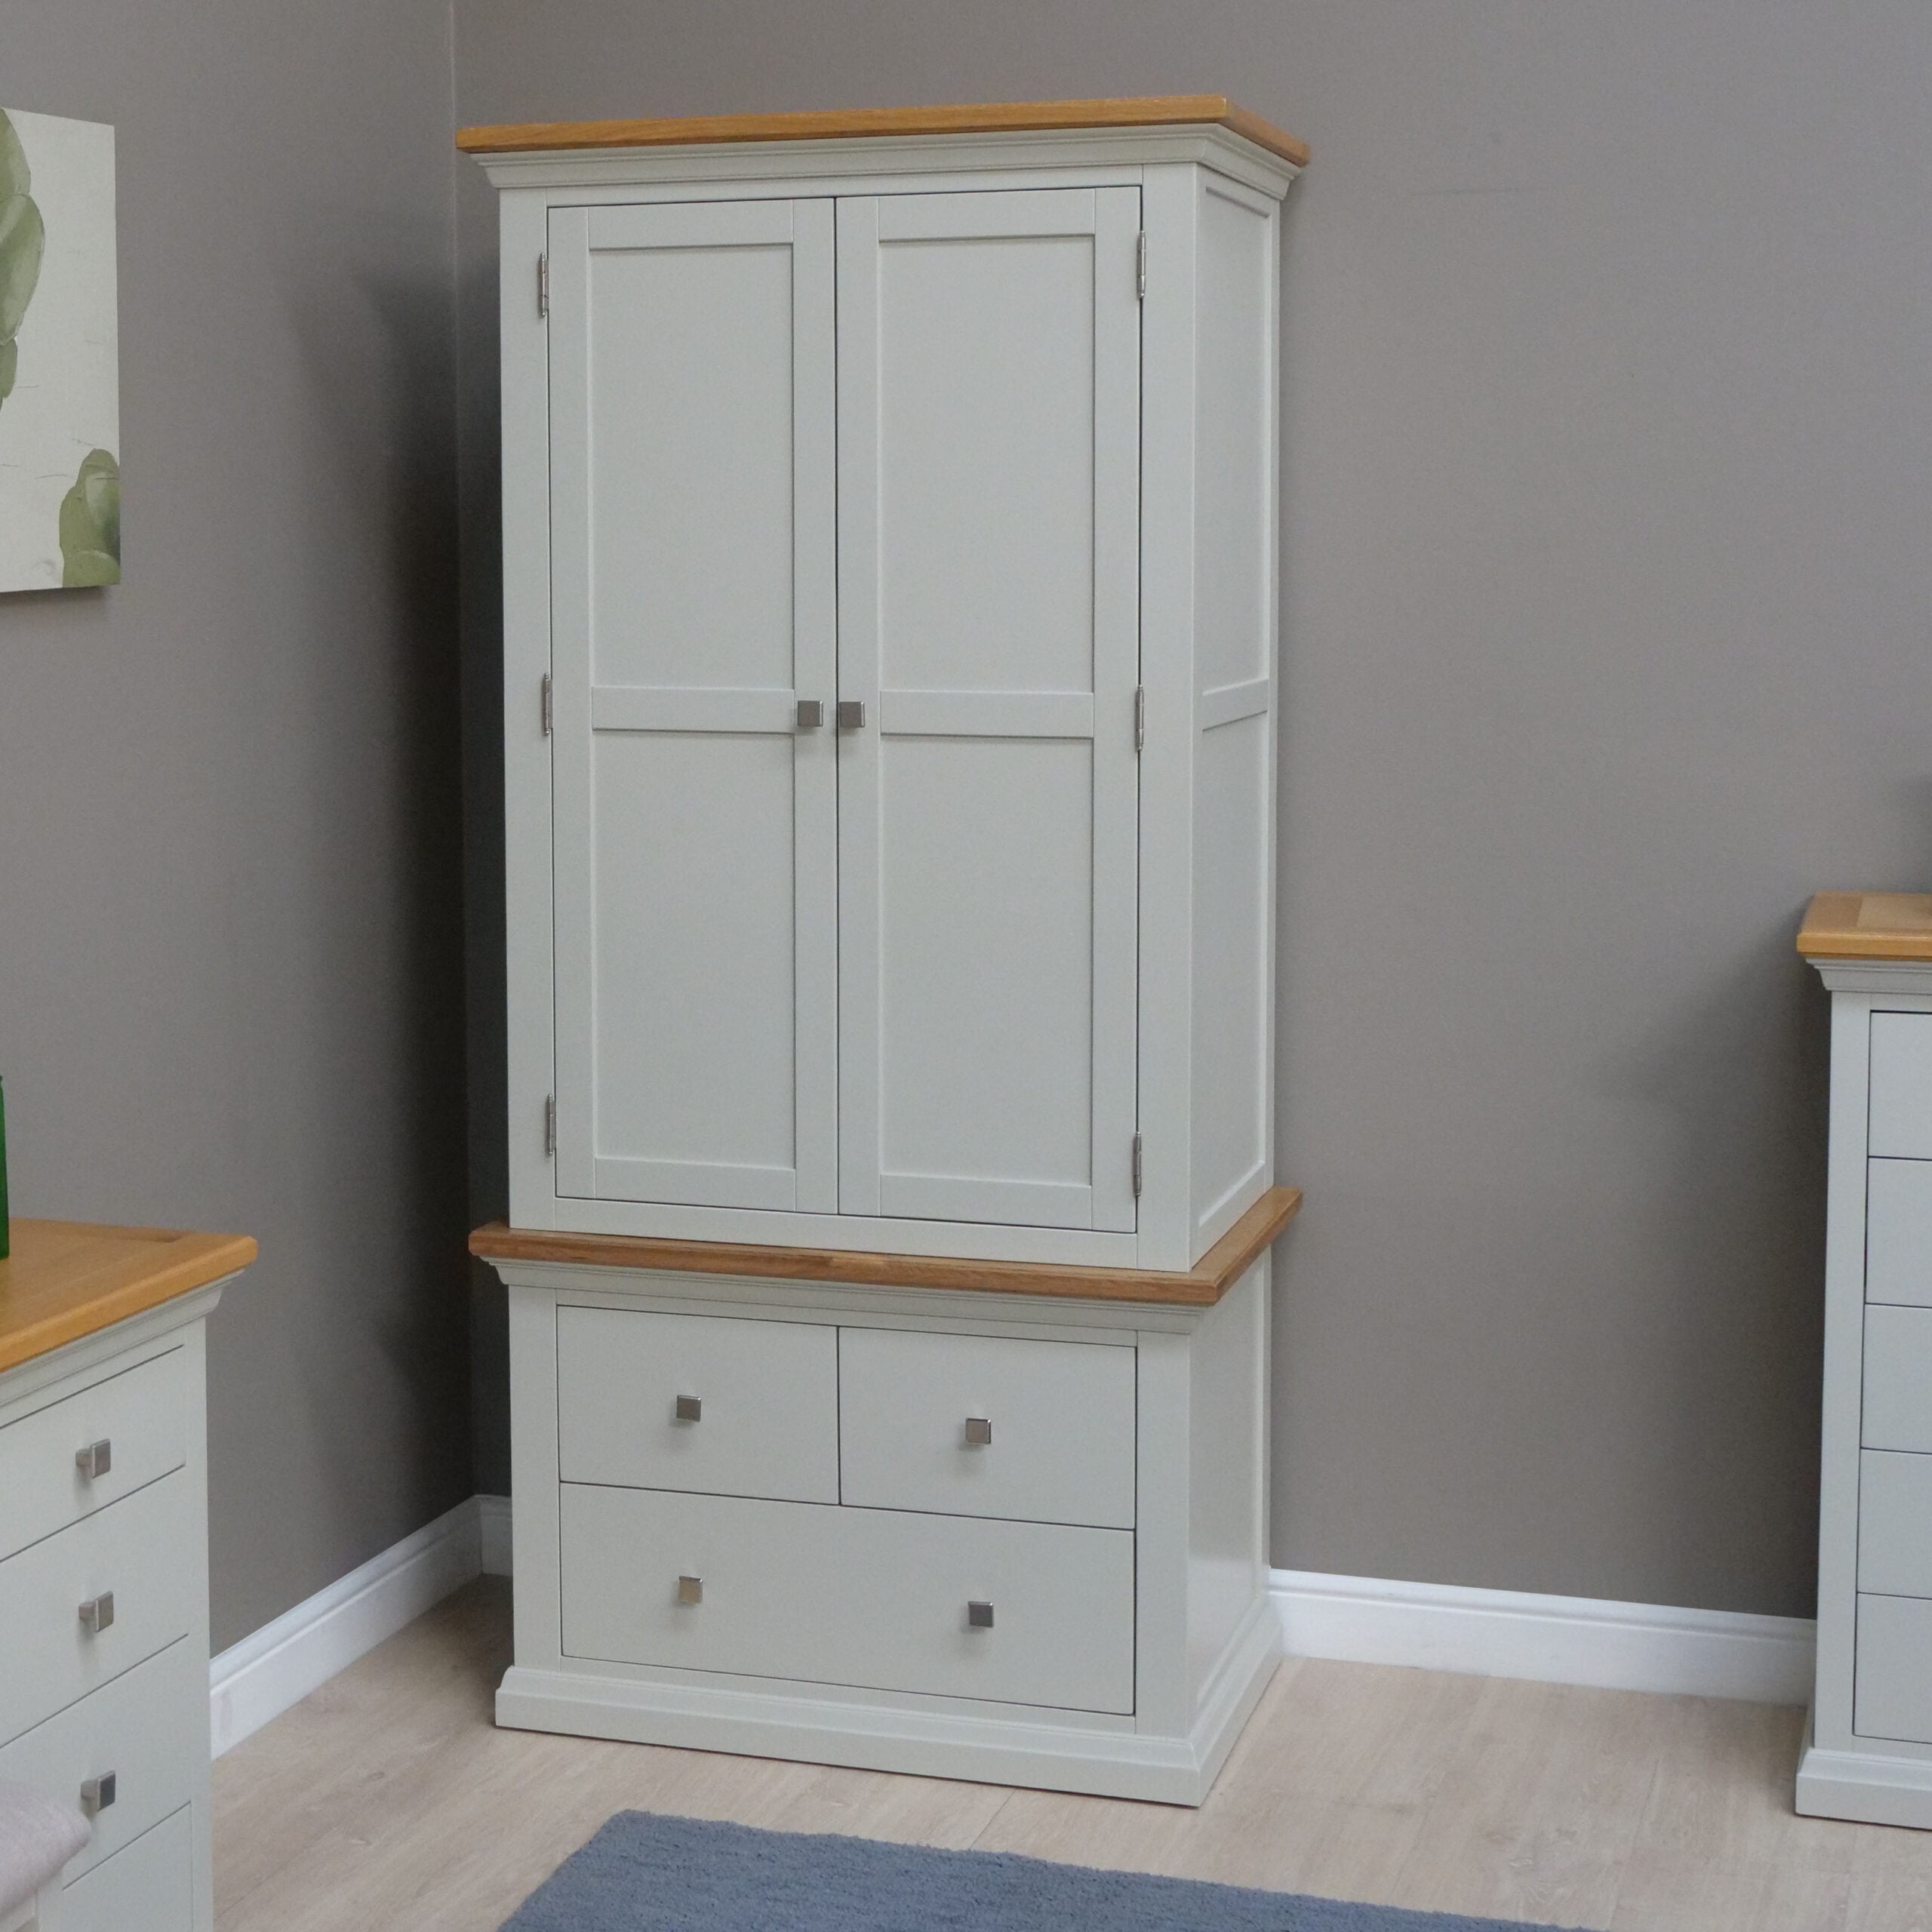 Cotswold Gents' Robe | Wardrobes | The Bay Furniture Company